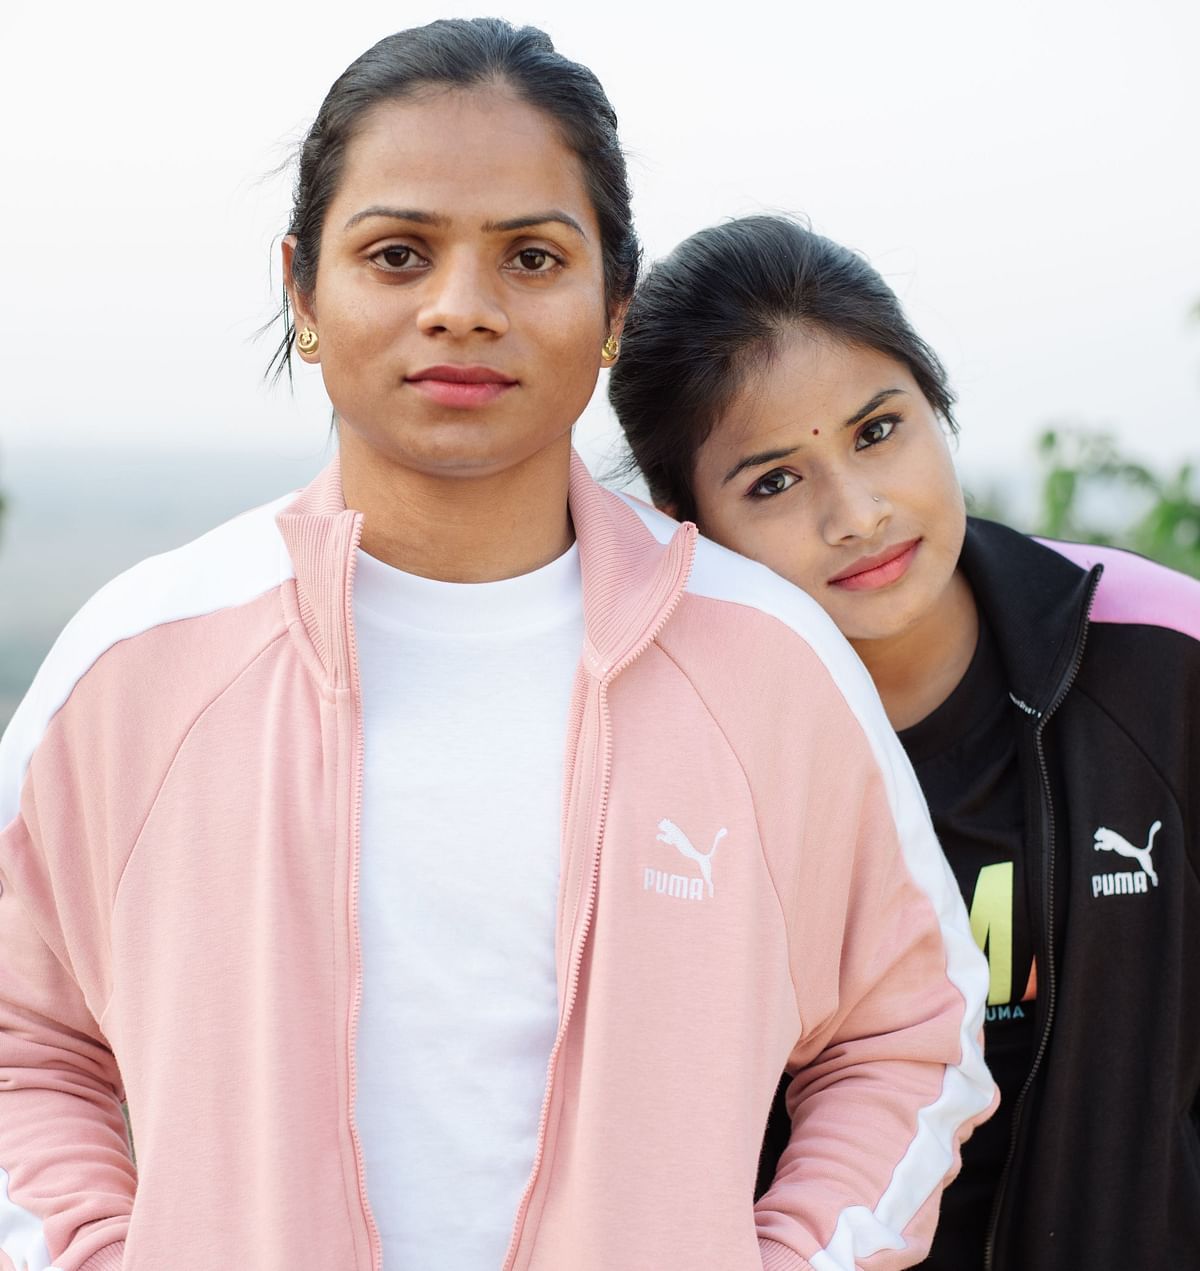 Dutee Chand came out in 2019, announcing her relationship with partner Monalisa.